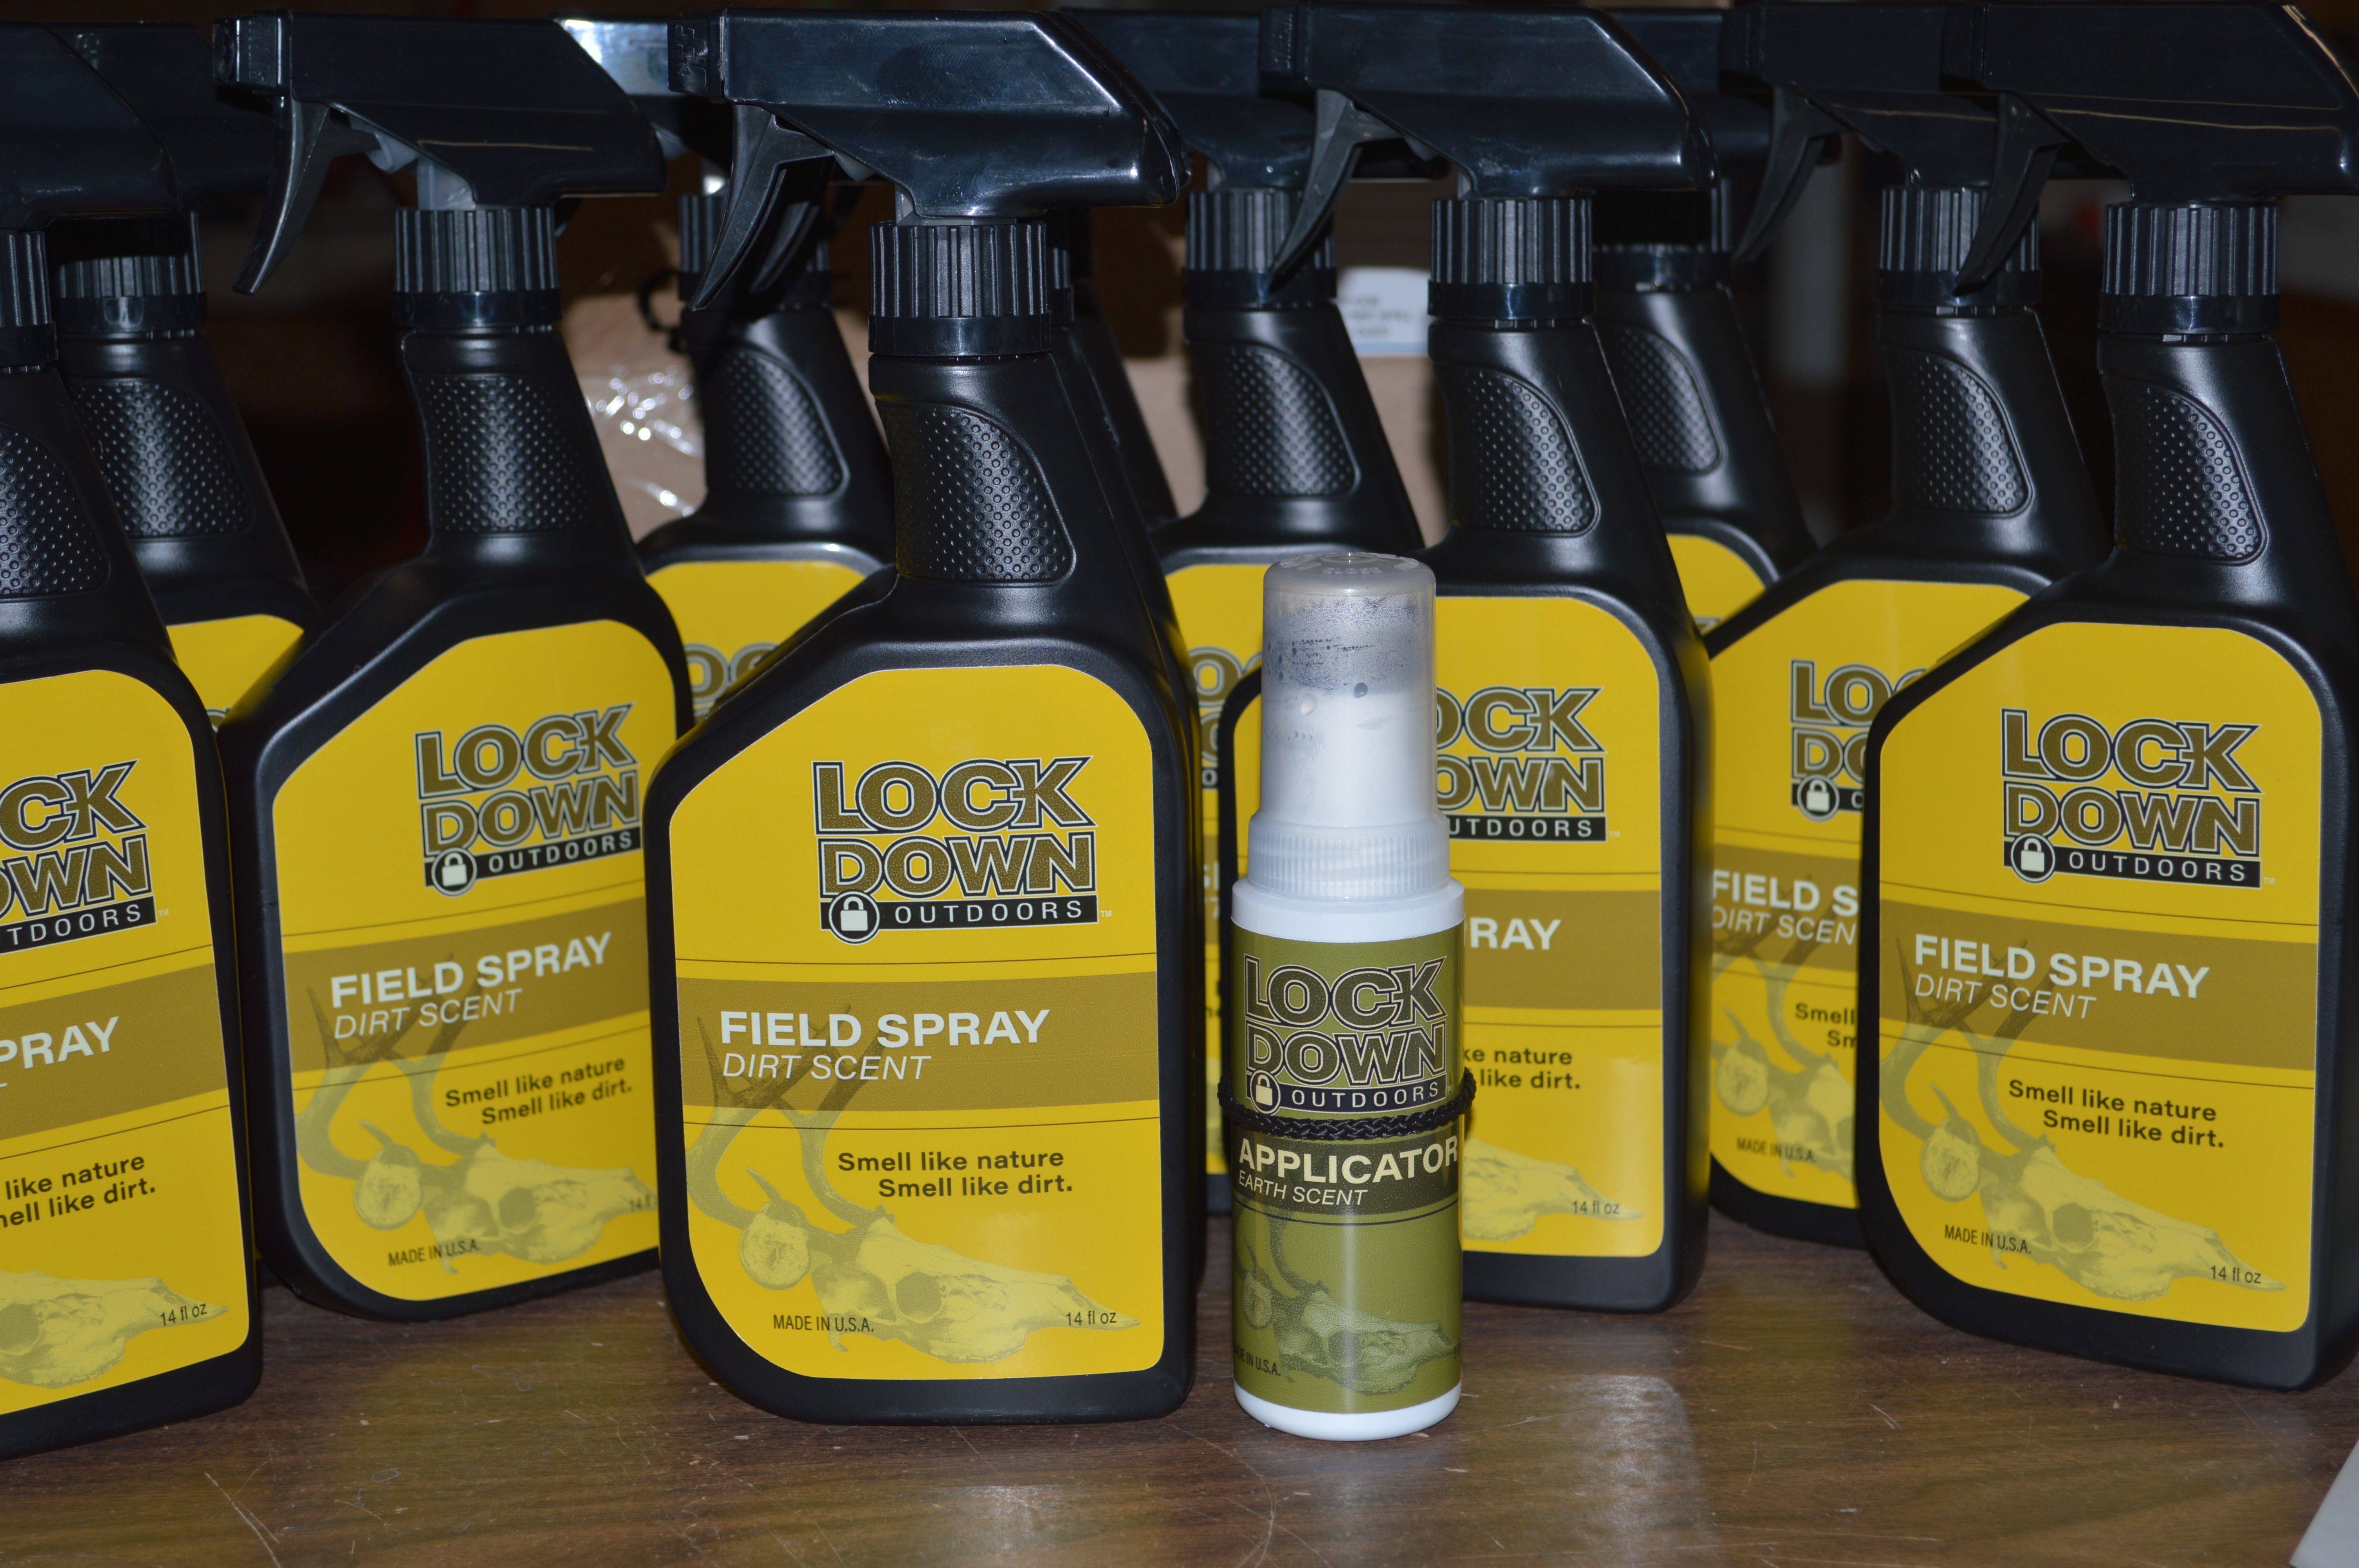 LockDown Field Spray Dirt and Earth Cover Scents